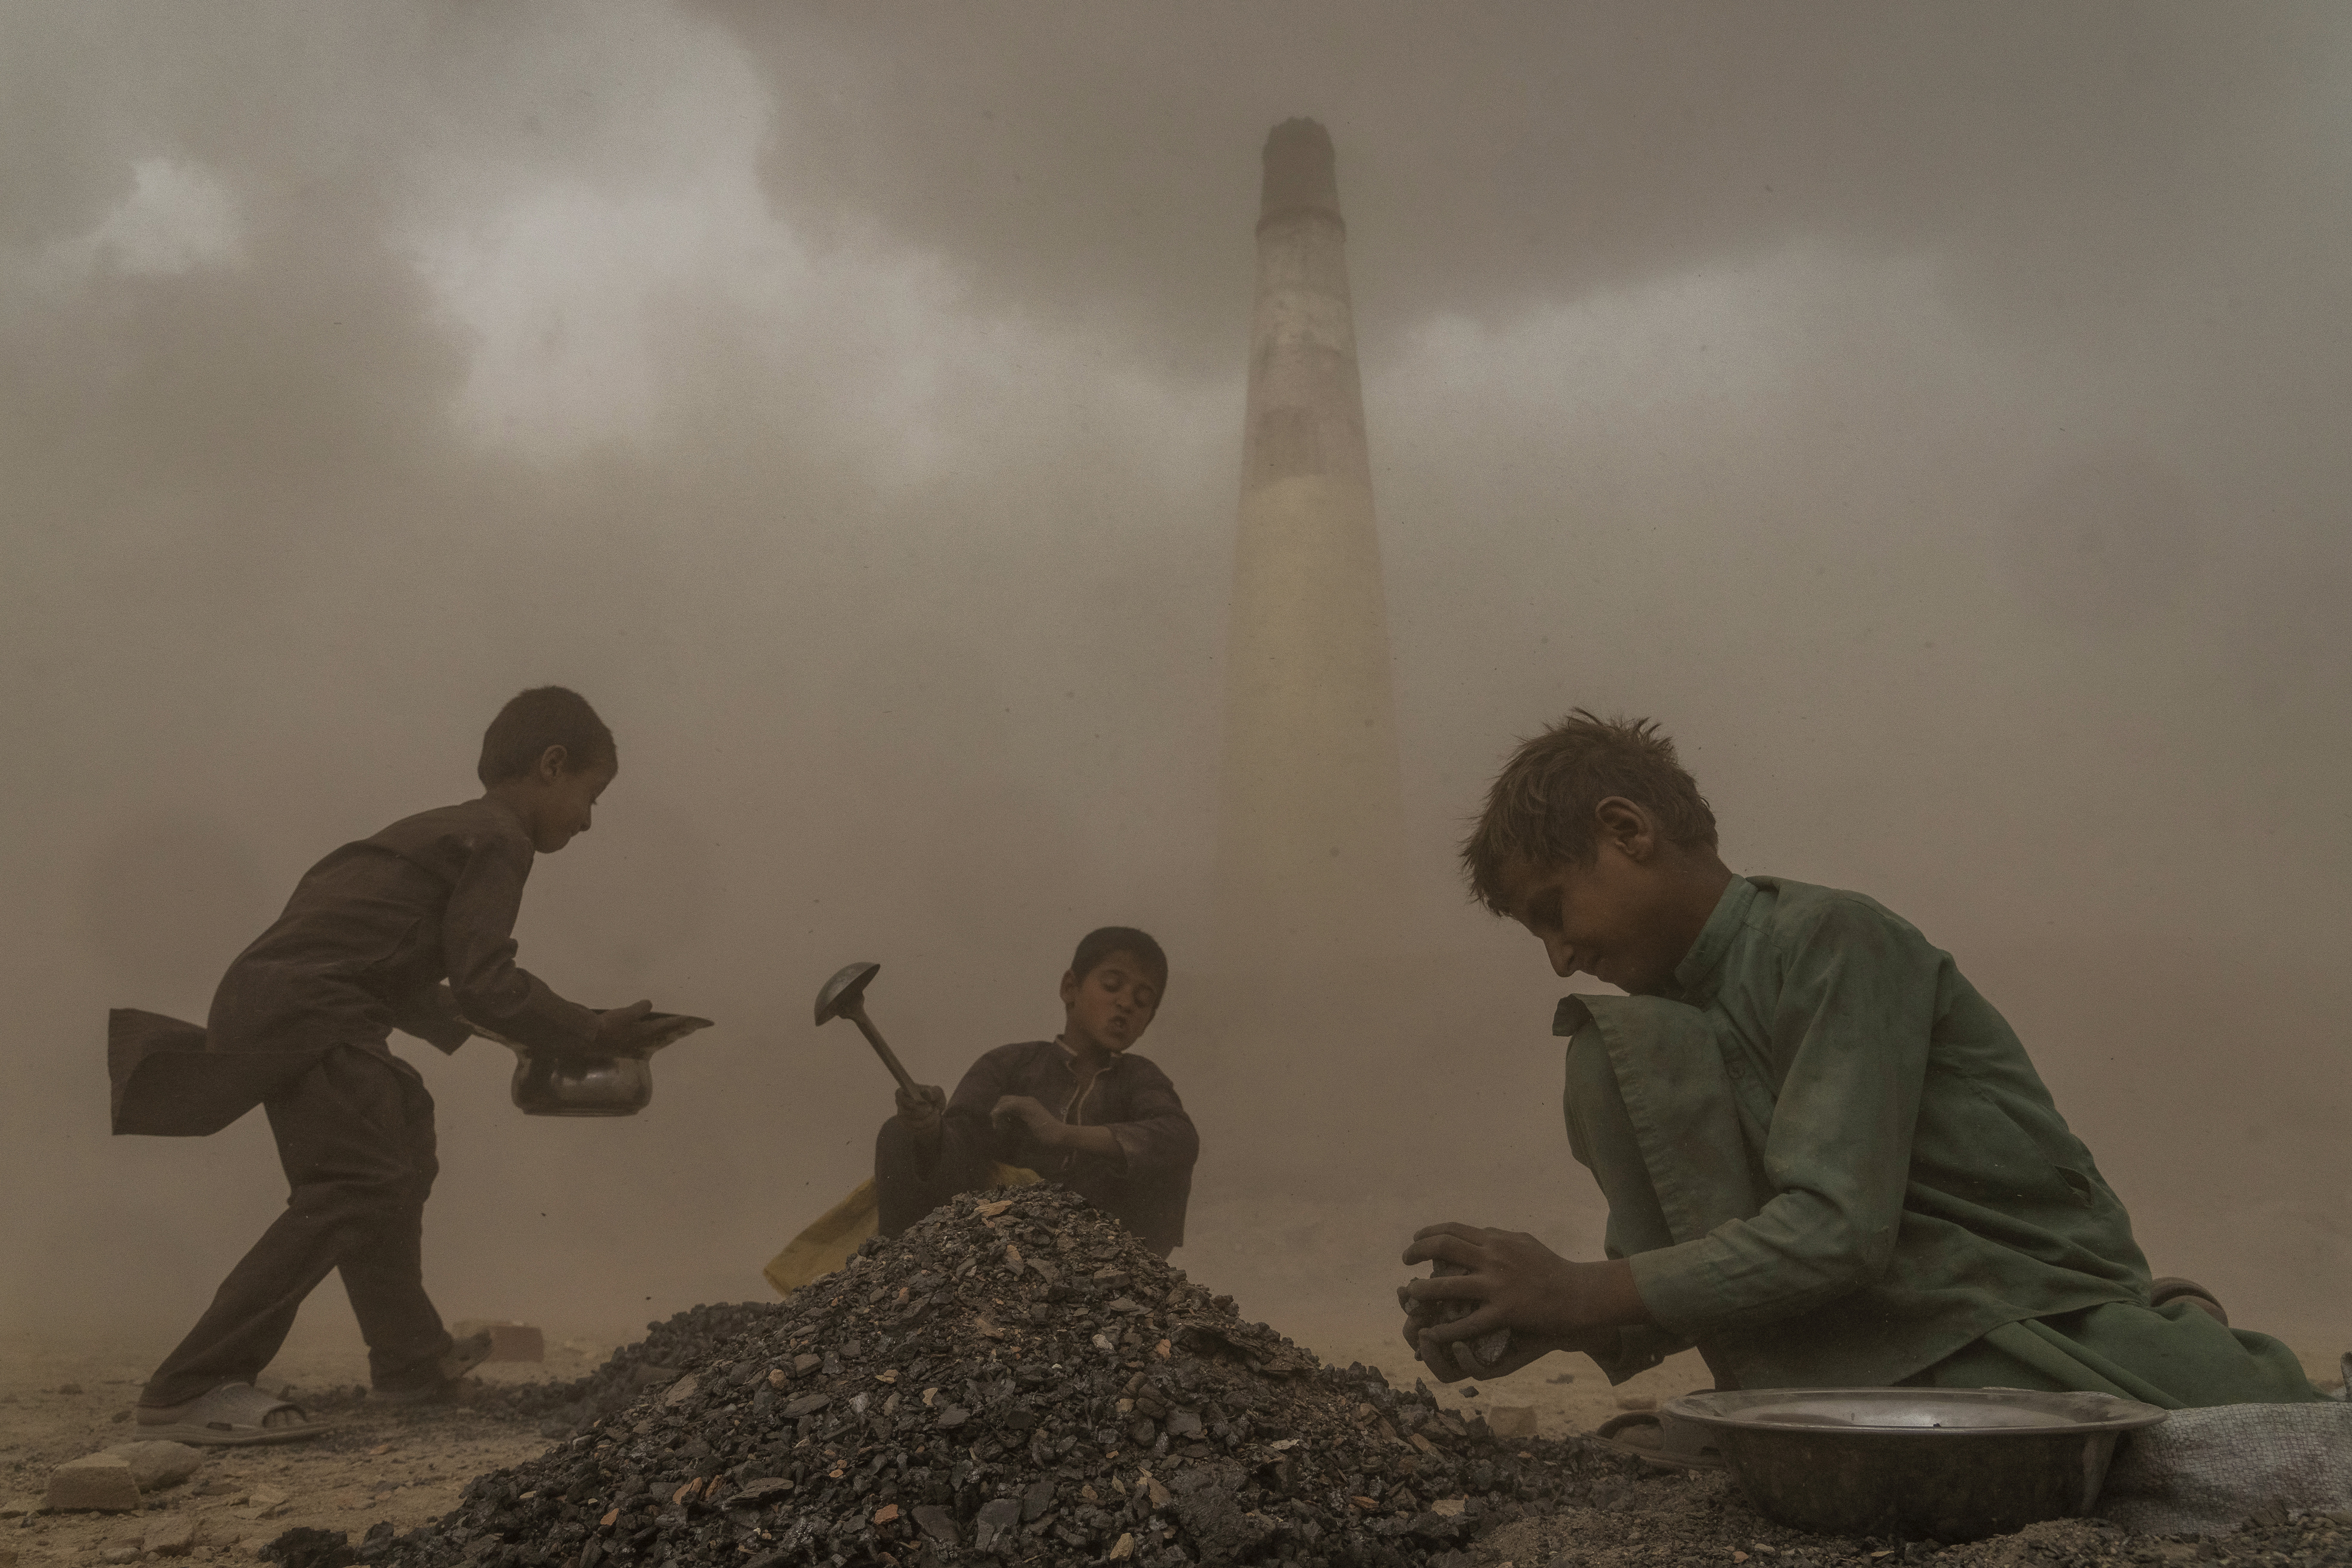 Afghan children work at a brick factory on the outskirts of Kabul, Afghanistan on Saturday, August 20, 2022.